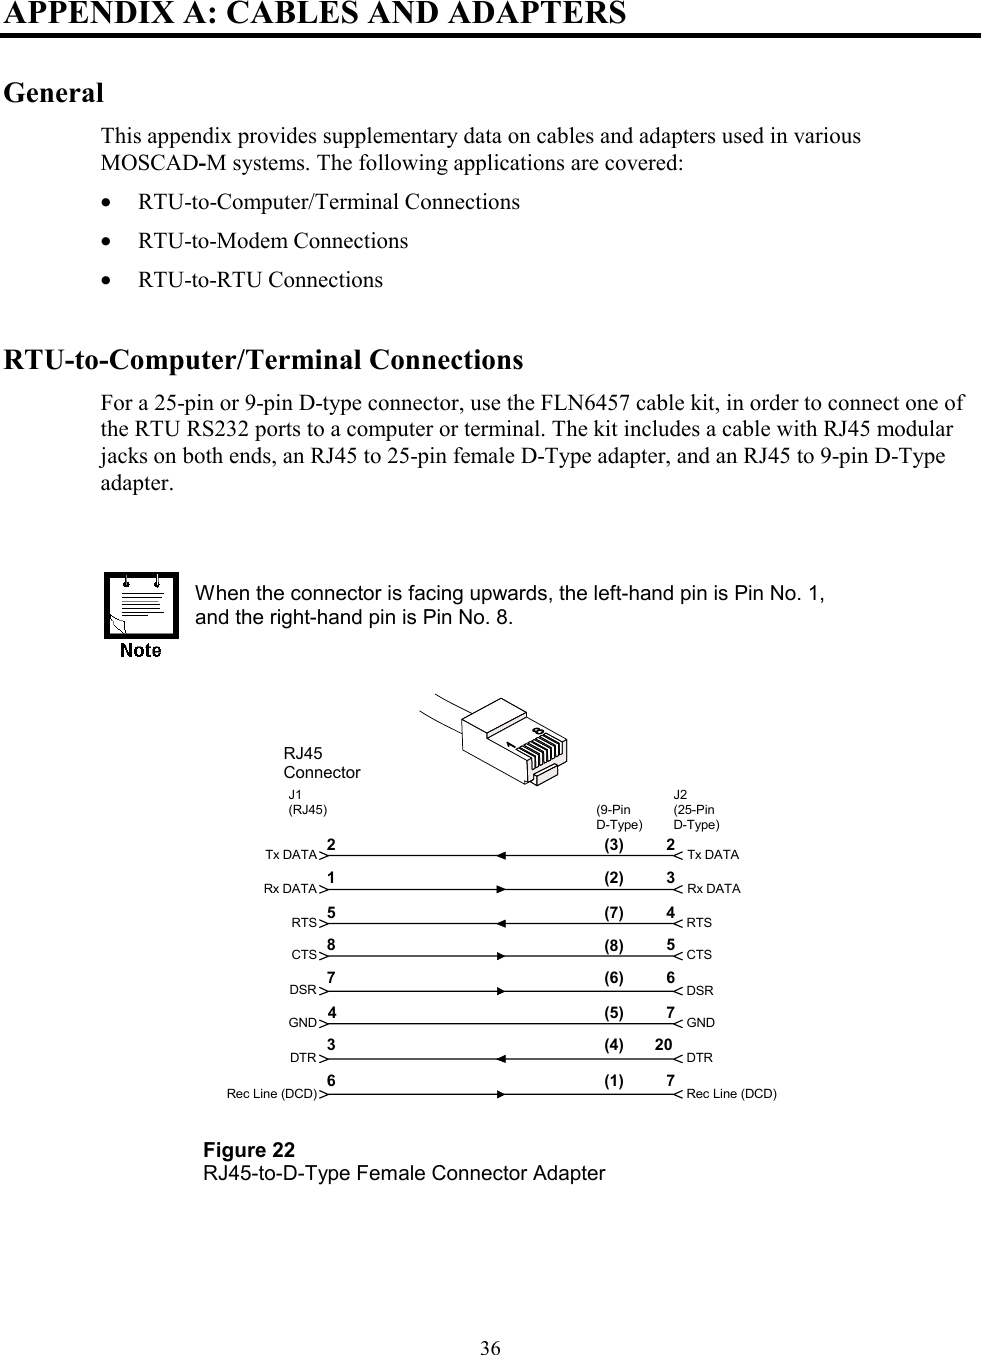 36APPENDIX A: CABLES AND ADAPTERSGeneralThis appendix provides supplementary data on cables and adapters used in variousMOSCAD-M systems. The following applications are covered:• RTU-to-Computer/Terminal Connections• RTU-to-Modem Connections• RTU-to-RTU ConnectionsRTU-to-Computer/Terminal ConnectionsFor a 25-pin or 9-pin D-type connector, use the FLN6457 cable kit, in order to connect one ofthe RTU RS232 ports to a computer or terminal. The kit includes a cable with RJ45 modularjacks on both ends, an RJ45 to 25-pin female D-Type adapter, and an RJ45 to 9-pin D-Typeadapter.When the connector is facing upwards, the left-hand pin is Pin No. 1,and the right-hand pin is Pin No. 8.Tx DATARx DATARTSCTSGNDDTRTx DATARx DATARTSCTSDSRGNDDTRRec Line (DCD)DSR22Rec Line (DCD)135485J1(RJ45)J2(25-PinD-Type)764732067(9-PinD-Type)(3)(2)(7)(8)(6)(5)(4)(1)Figure 22RJ45-to-D-Type Female Connector AdapterRJ45Connector